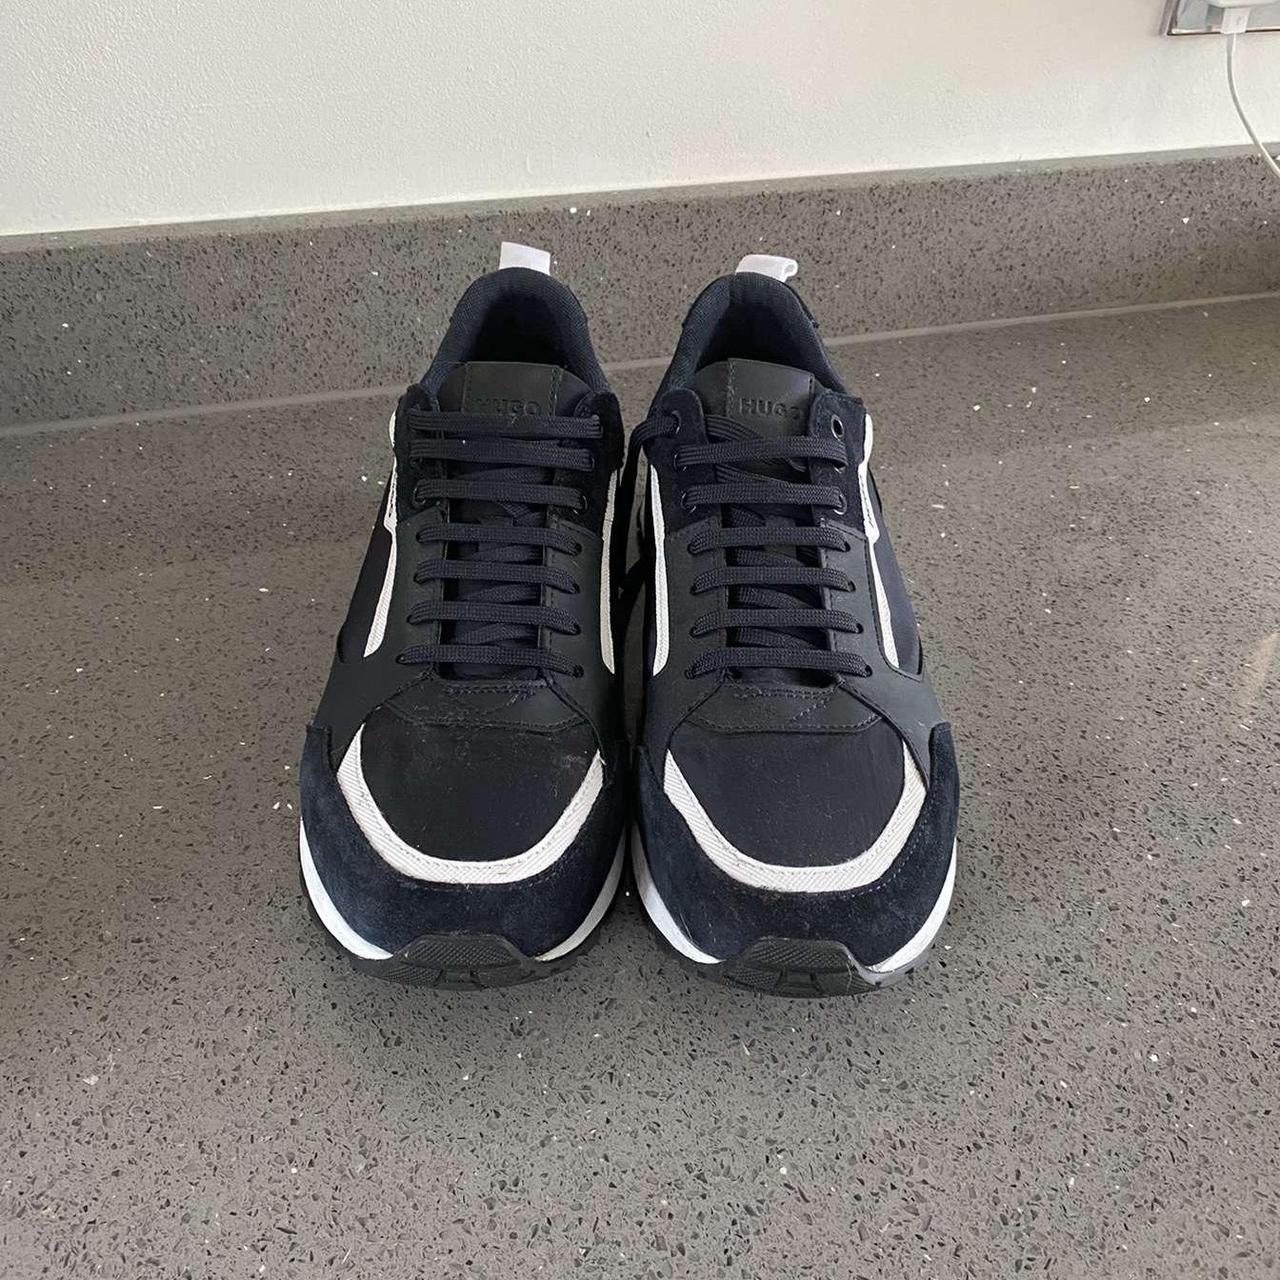 Hugo Boss men’s Trainers Been worn once Bought for... - Depop